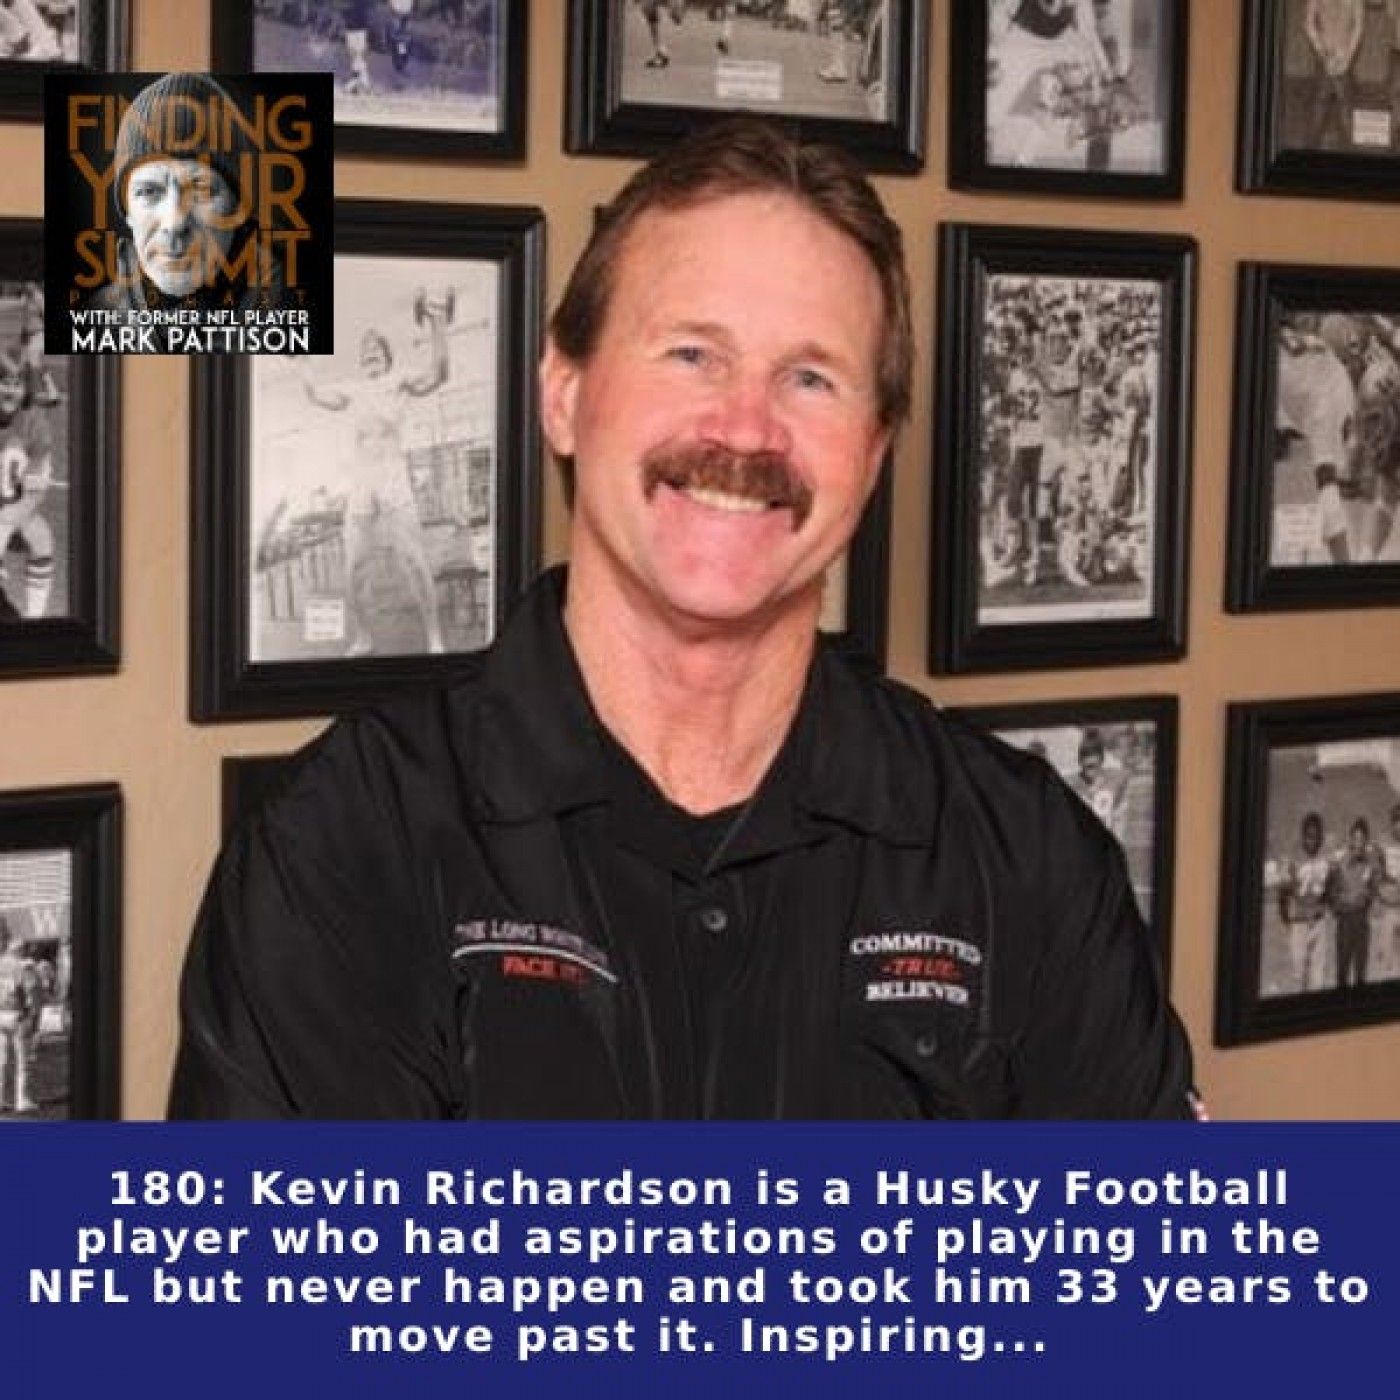 Kevin Richardson is a former Husky Football player who had aspirations of playing in the NFL but never happen and took him 33 years to move